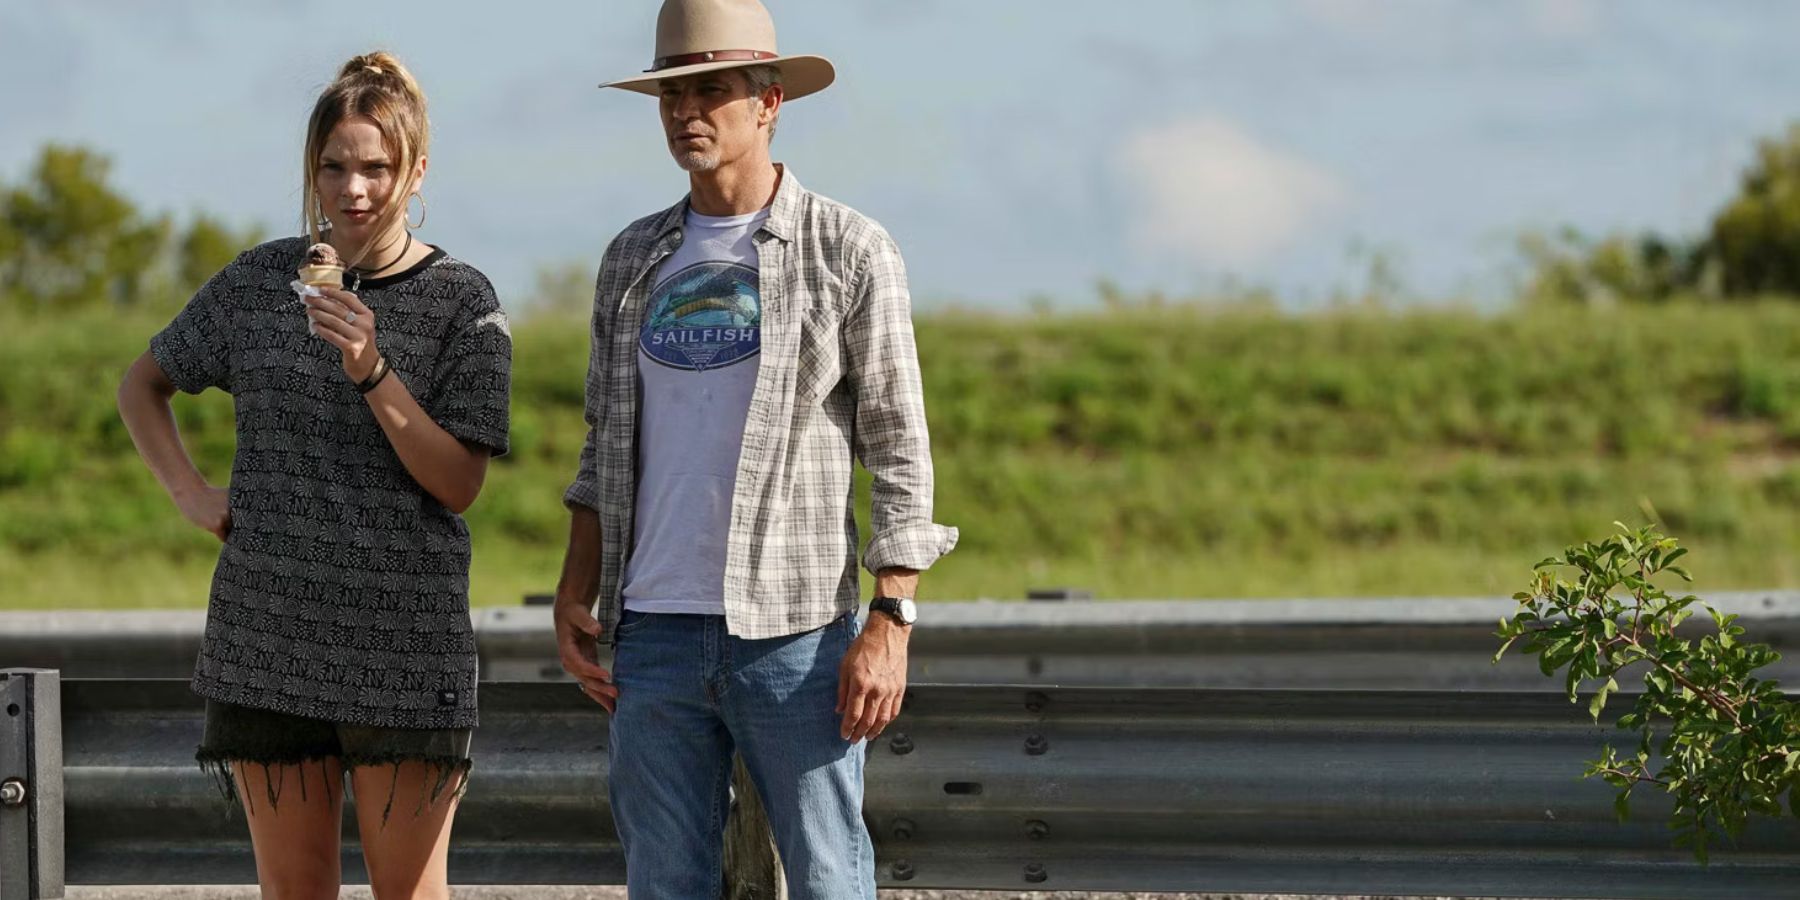 Justified: City Primeval Season 2 Prospect Gets An Update From Timothy Olyphant